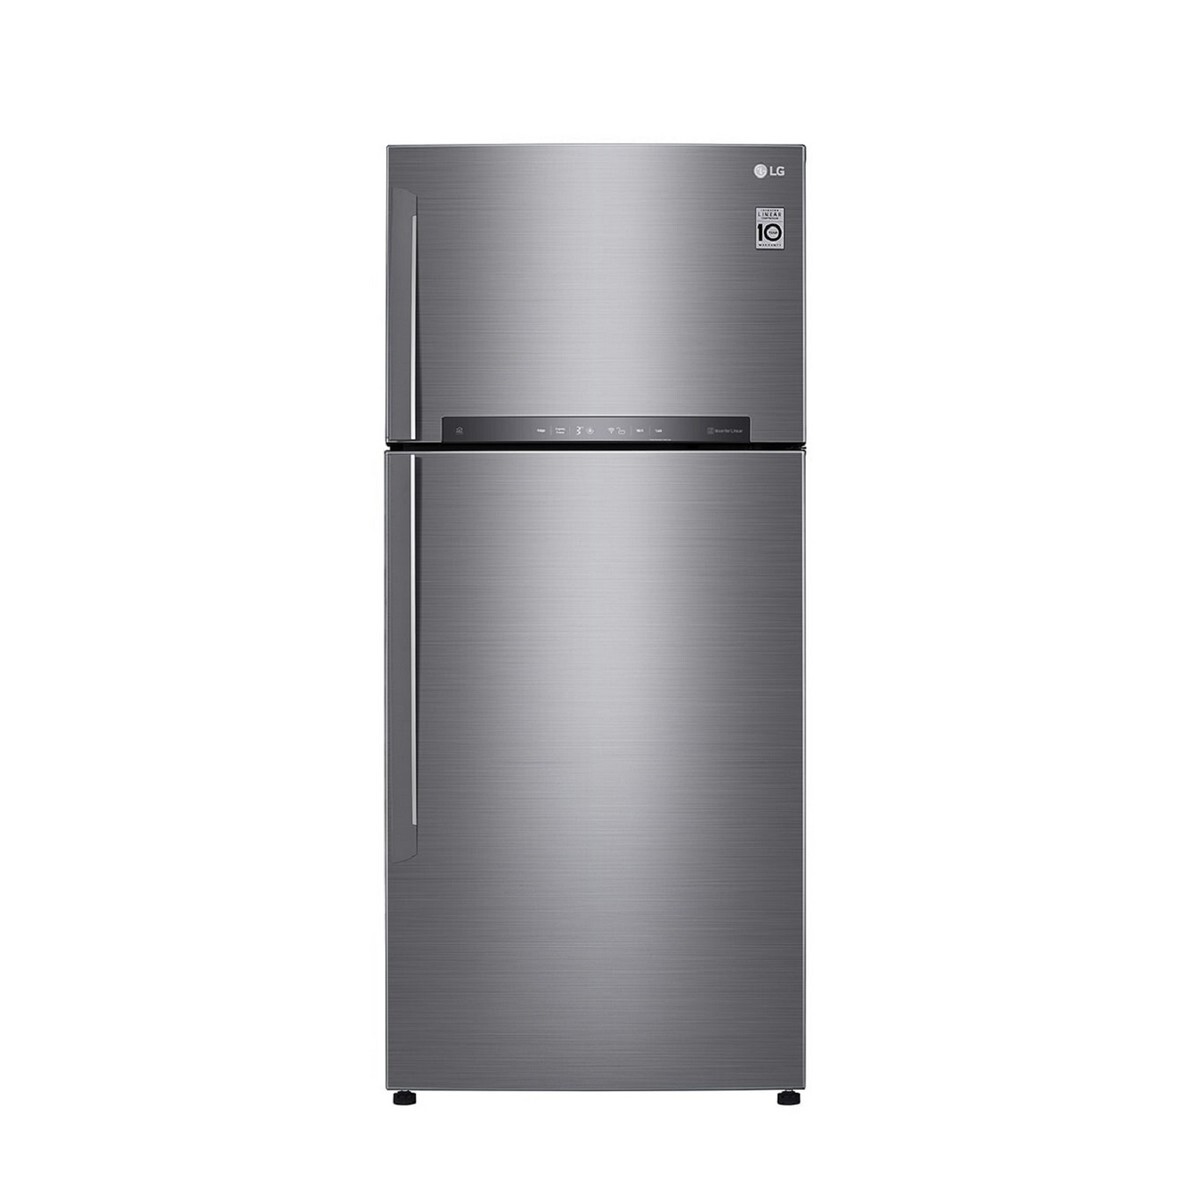 LG Frost Free Double Door Refrigerator GN-H602HLHM 475L